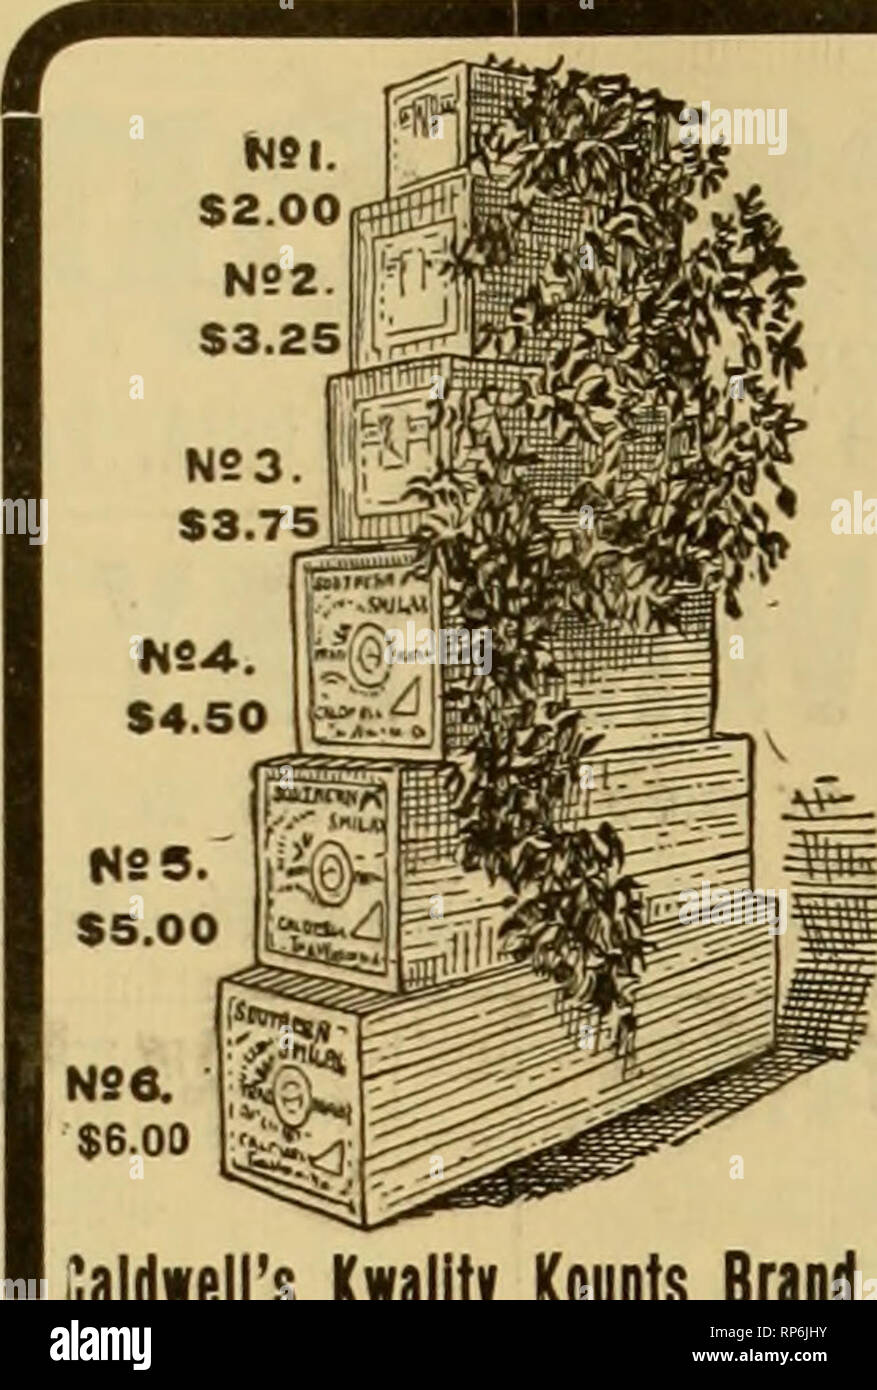 . The American florist : a weekly journal for the trade. Floriculture; Florists. J. B. DEAMUD, WHOLESALE CUT flOWERS 51 Wabash Ave., G^XGA-GO. Daldwell's Kwality Kounts Brand CONSTANTLY ON HAND. PRICE LIST. PerDoz Beauties, 30 to 36 inch stem «8.00 to »10.00 20 to 24 inch stem 6.00 to 8.00 &quot; 15 to 18 inch stem 4.00 to 6.00 •iV-. &quot; 12 inch stem 4.00 Per 100 ^g Liberty and Chatenay 6.00 to 20.90 *&quot;&quot;&quot; Brides and Bridesmaids lOOO to 15.00 Meteor and Golden Gates 10.00 to 15.00 Carnations 5.00 to 6.00 fancy 8 00 to 10.00 Valley 2.00 to 4.00 Violets, double 1.50 to 3.00 &quo Stock Photo